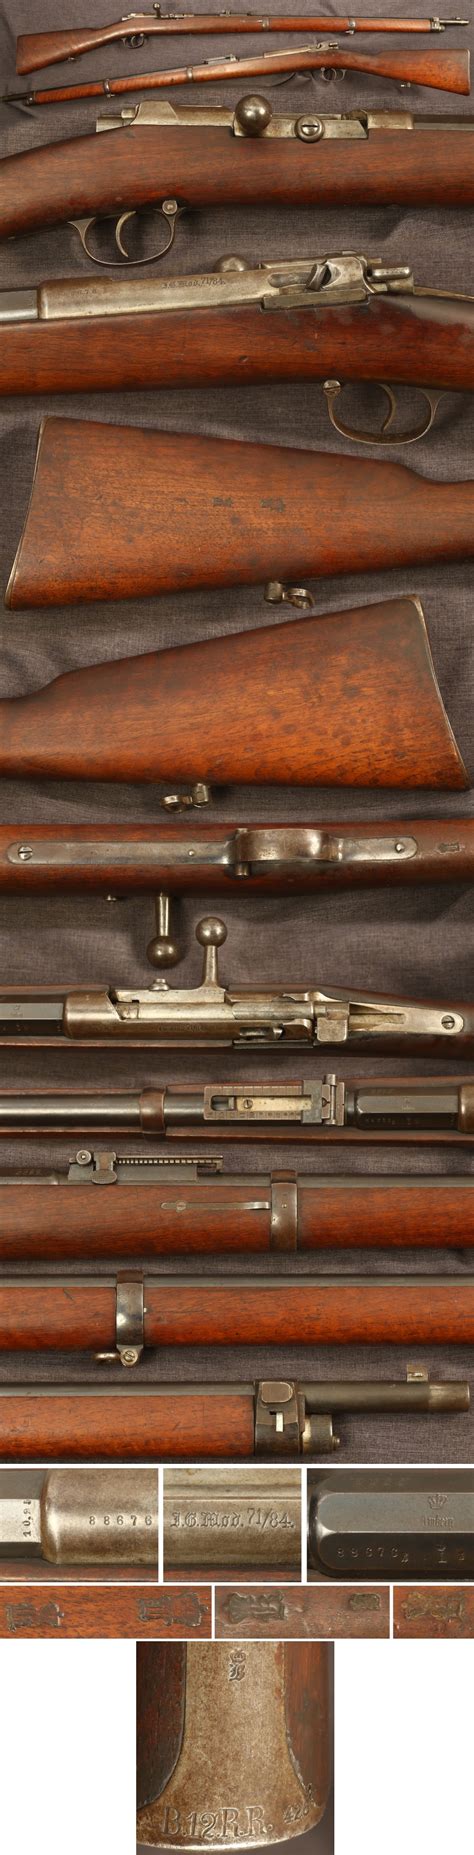 German M187184 Mauser Bolt Action Rifle With